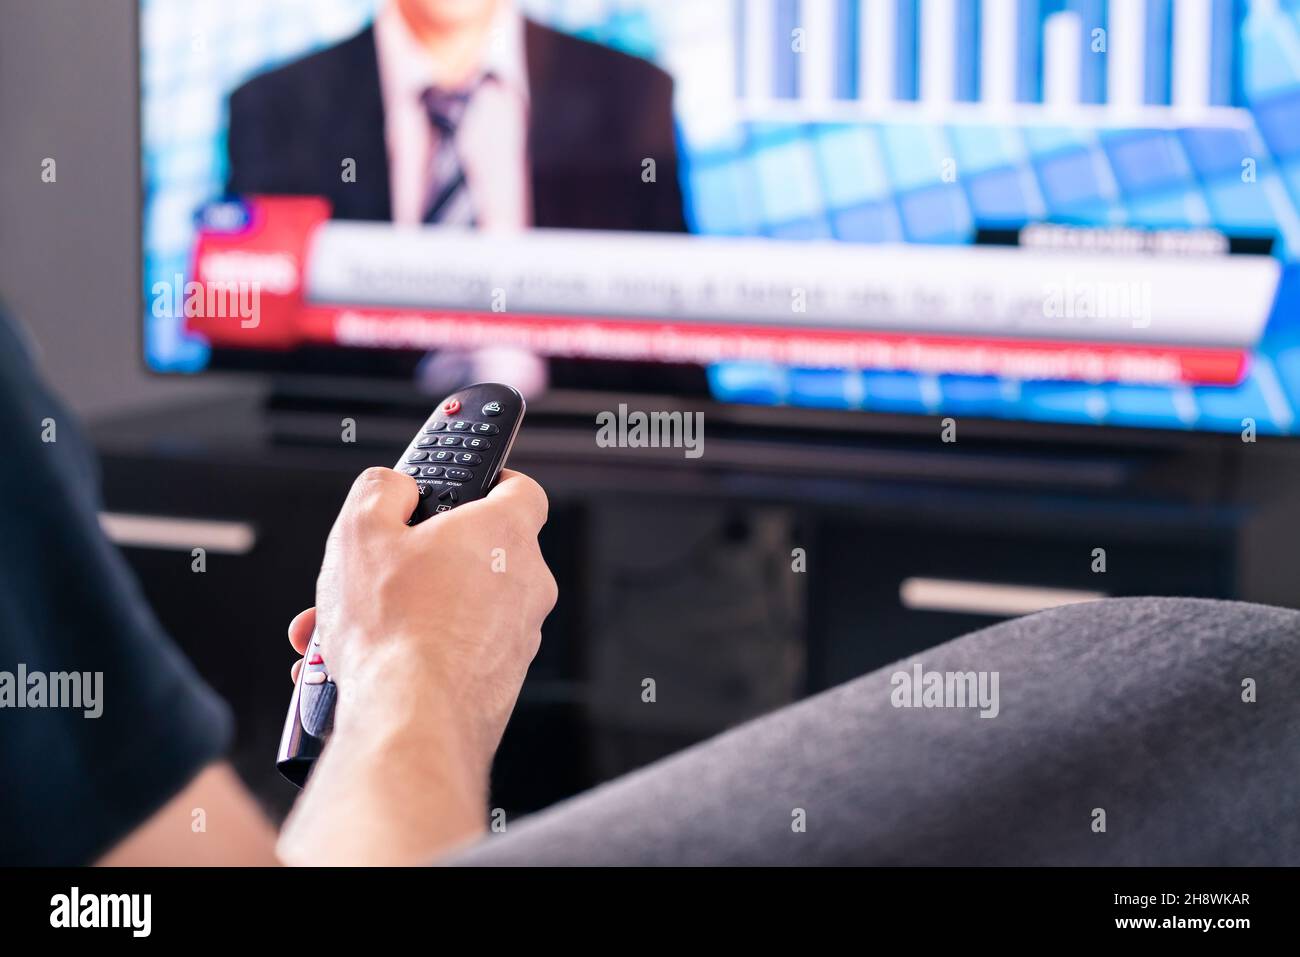 Breaking news on tv. Man watching live television broadcast program. Covid19, coronavirus and medical information or election reporter. Stock Photo